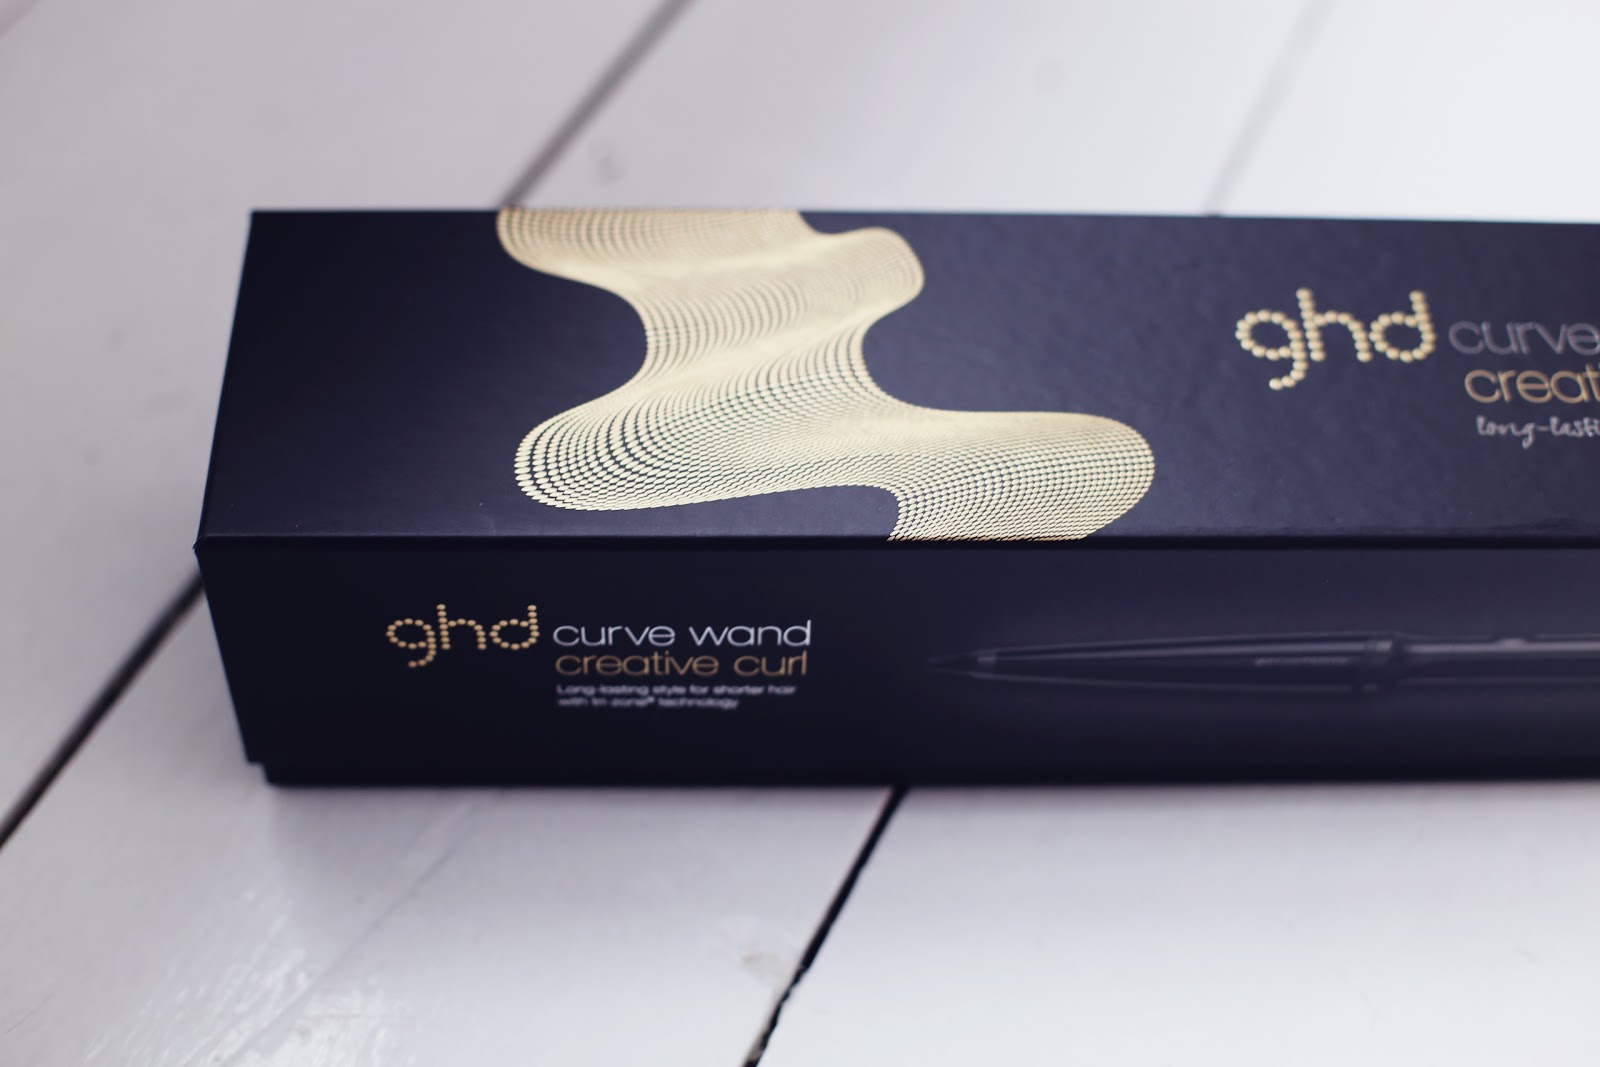 Making waves with the ghd Curve Creative Curl Wand